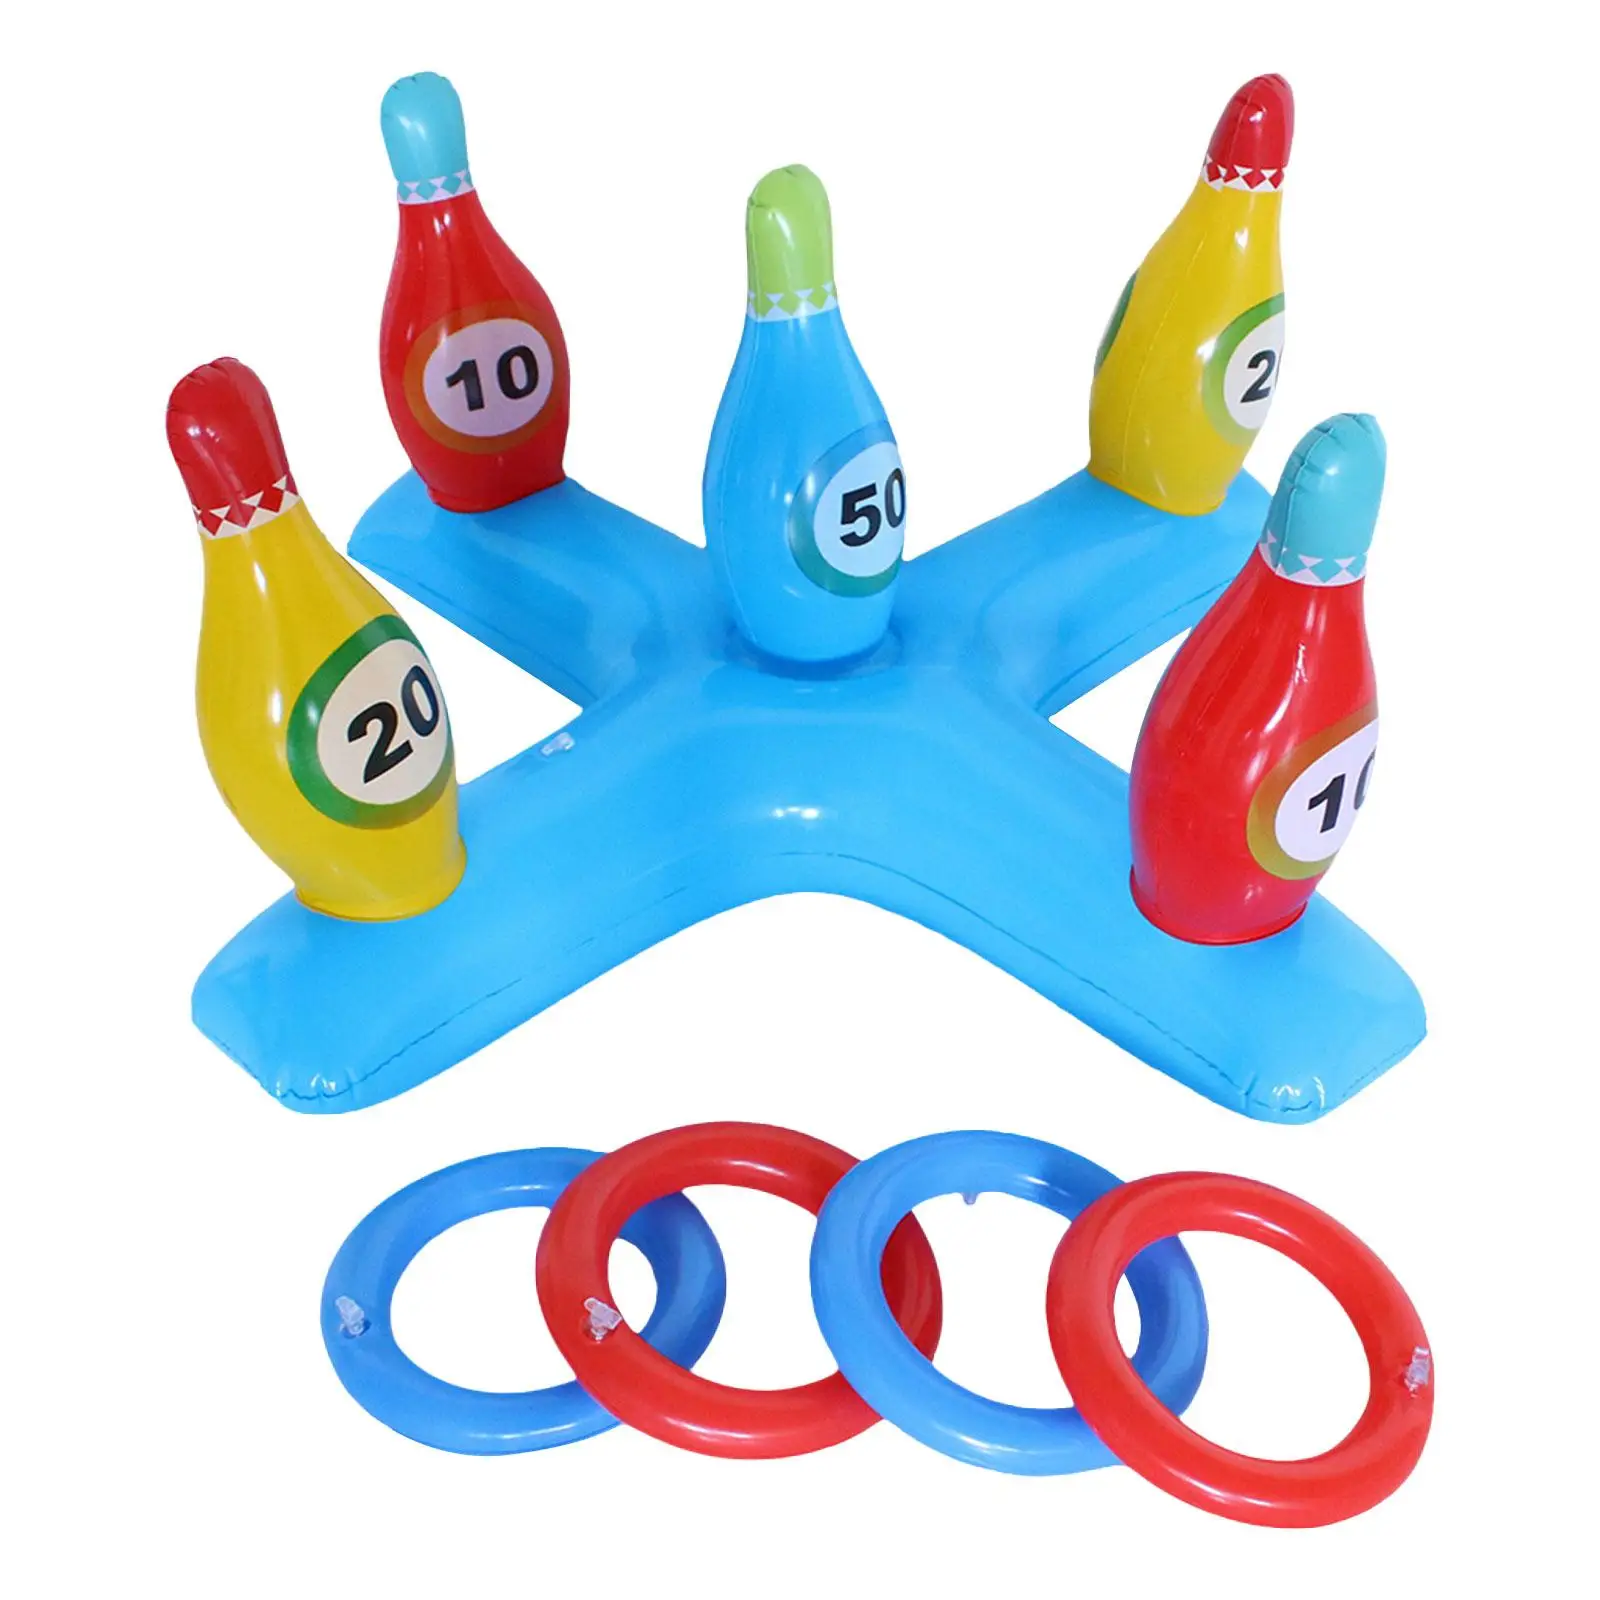 Ring Toss Game Set Cross Game Throwing Ring Set for Outdoor Party Activity